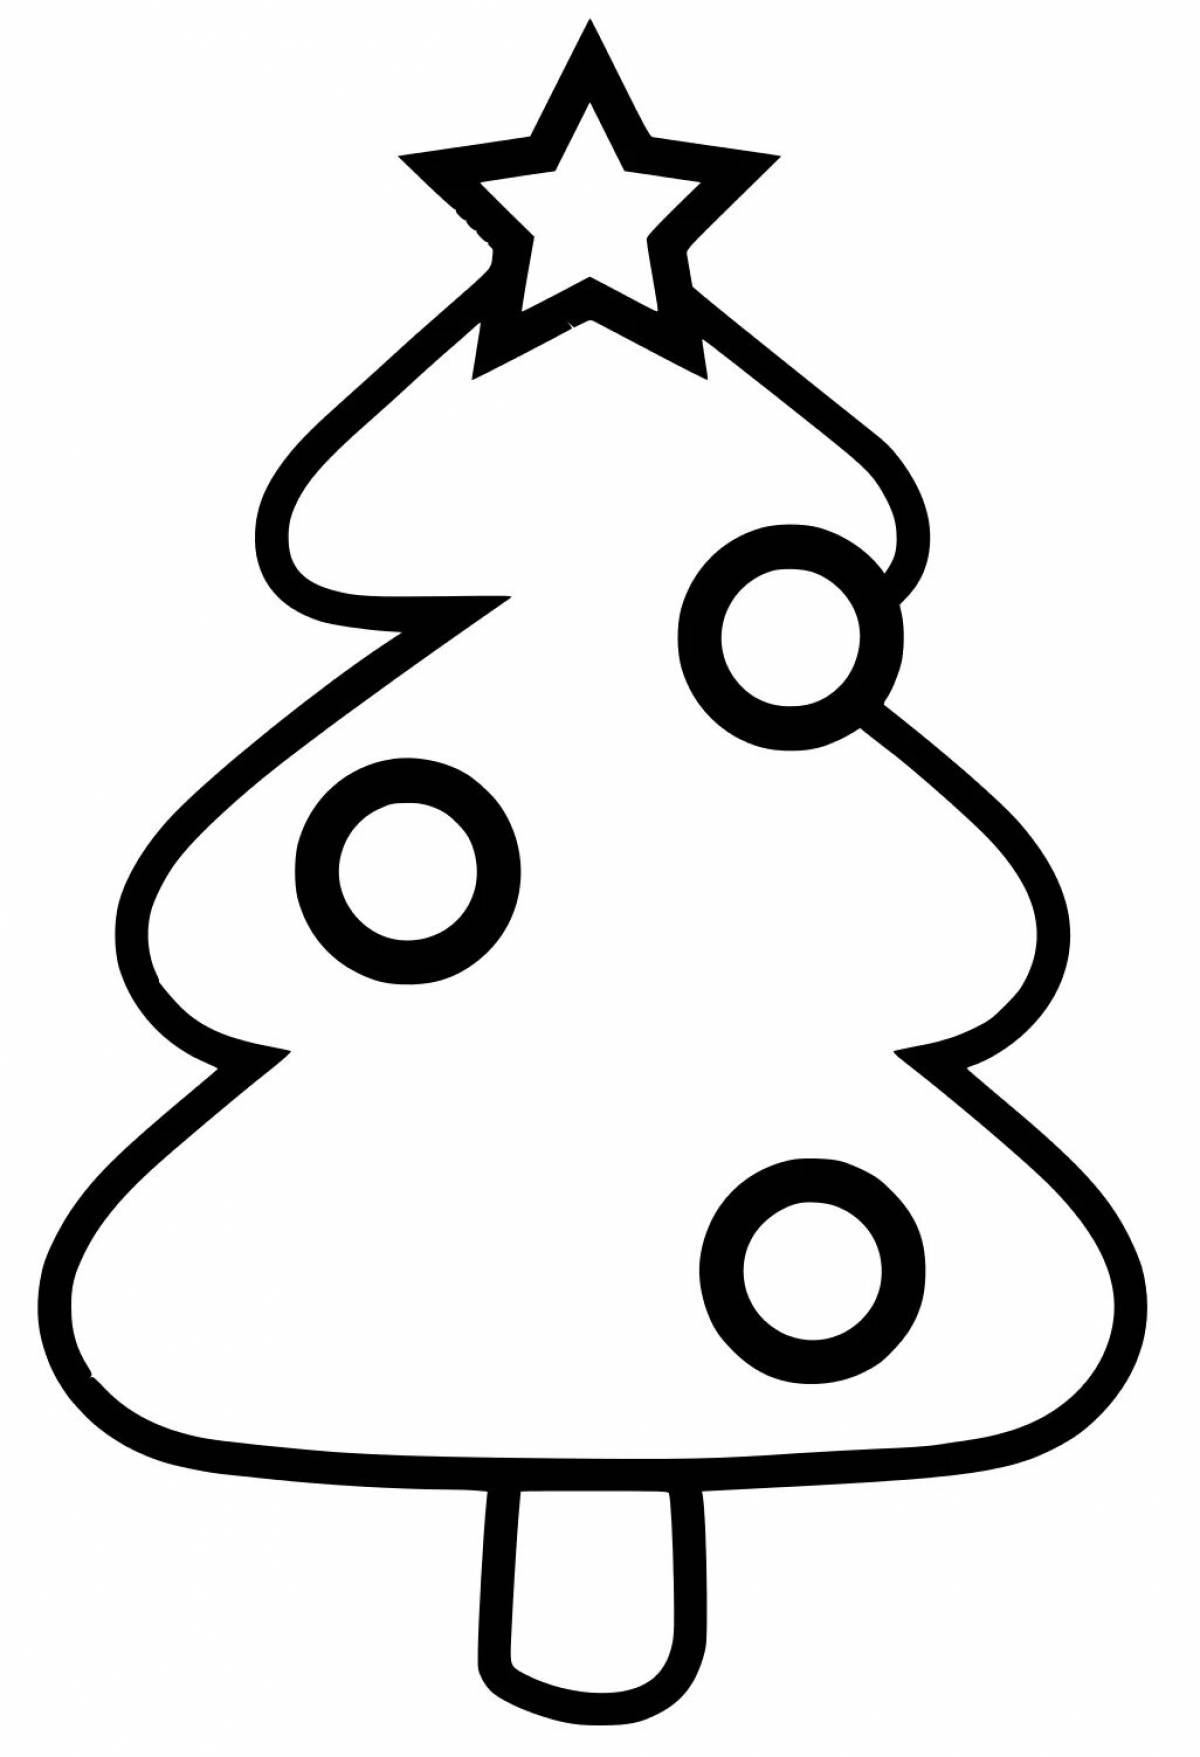 Crazy Colored Christmas Tree Coloring Pages for Kids